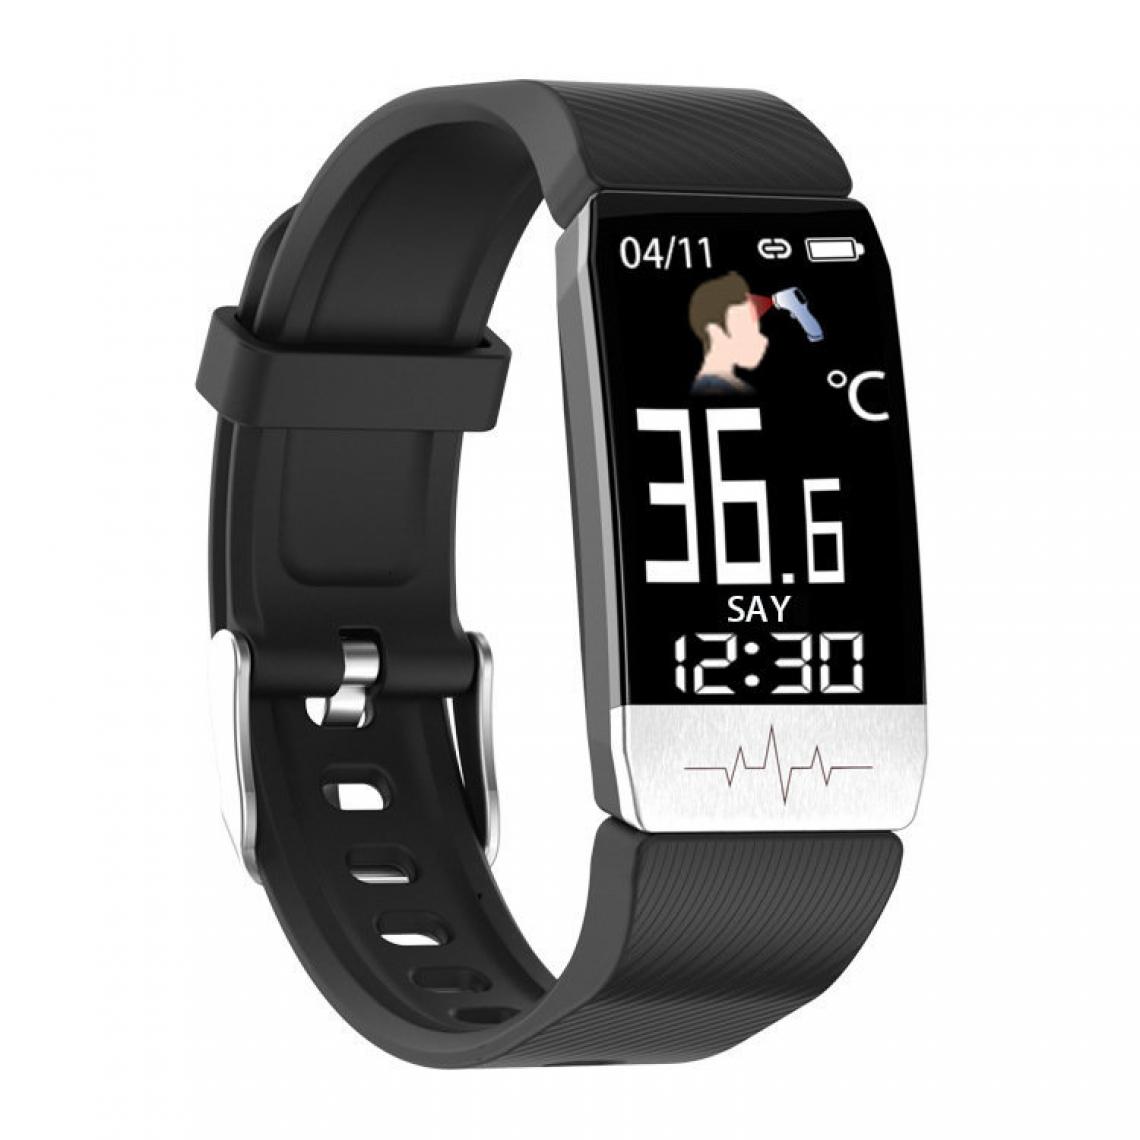 Chronotech Montres - Fitness Bracelet with Heart Rate Monitor Waterproof IP68 Fitness Tracker Smartwatch ECG PPG Activity Tracker Heart Rate Monitor Pedometer Watch Sports Watch(black) - Montre connectée